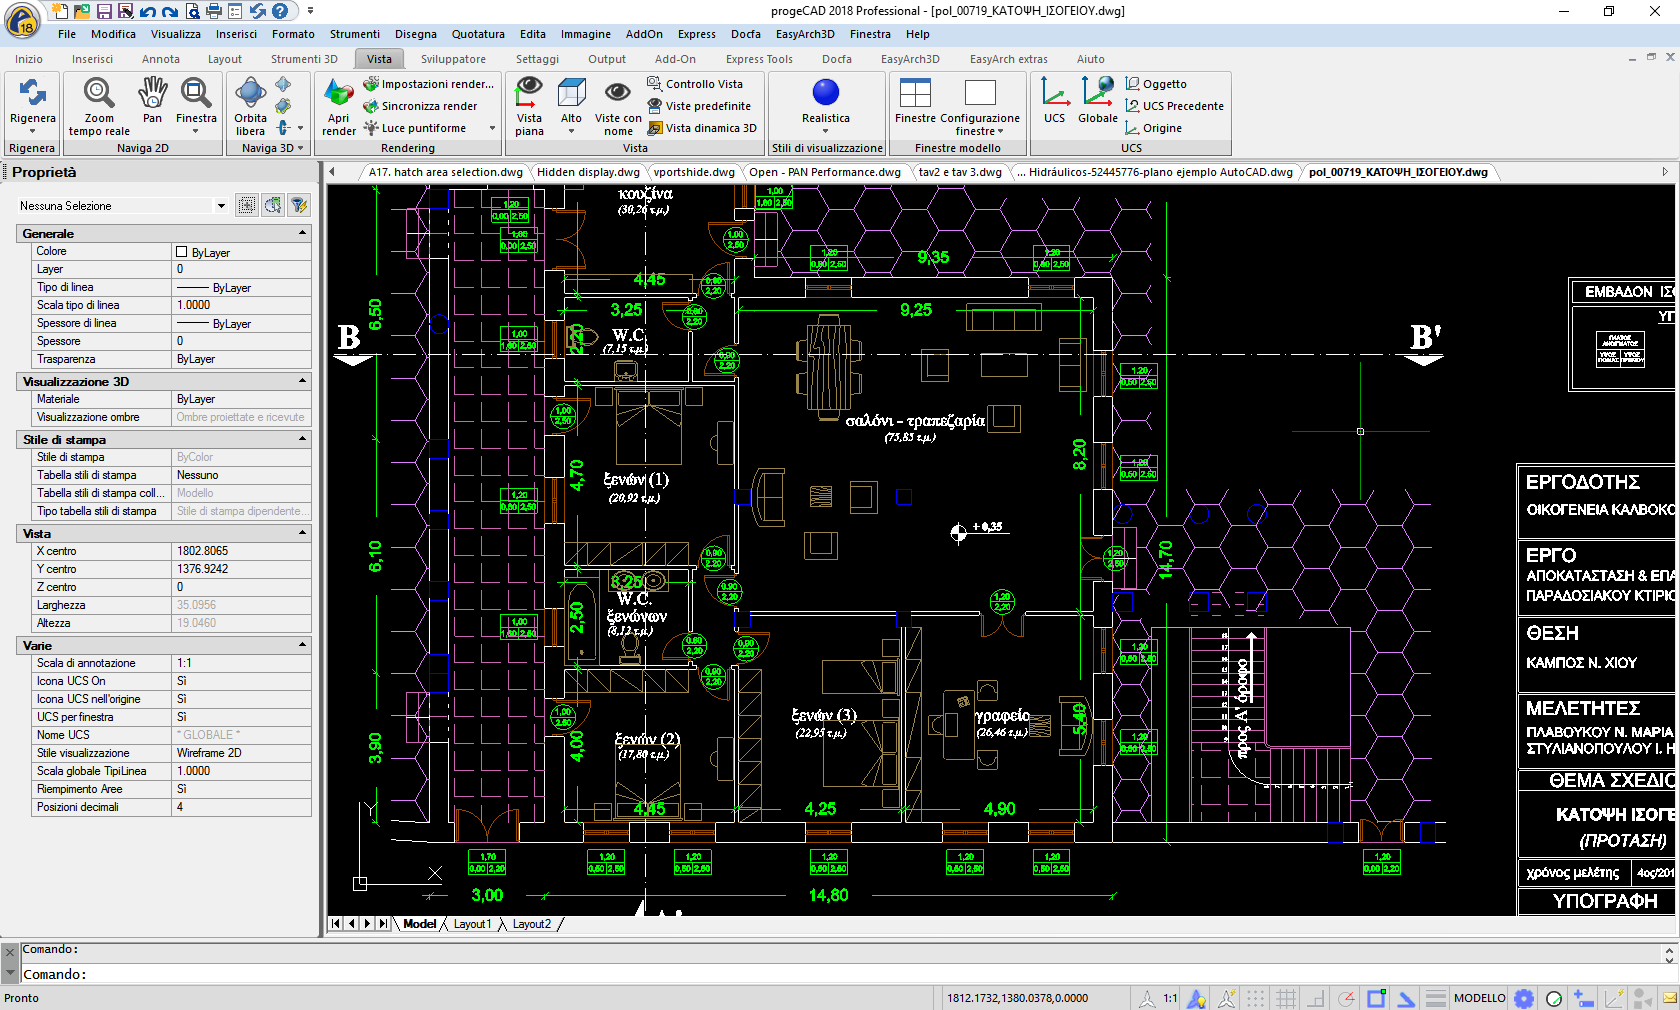 one time purchase autocad lt